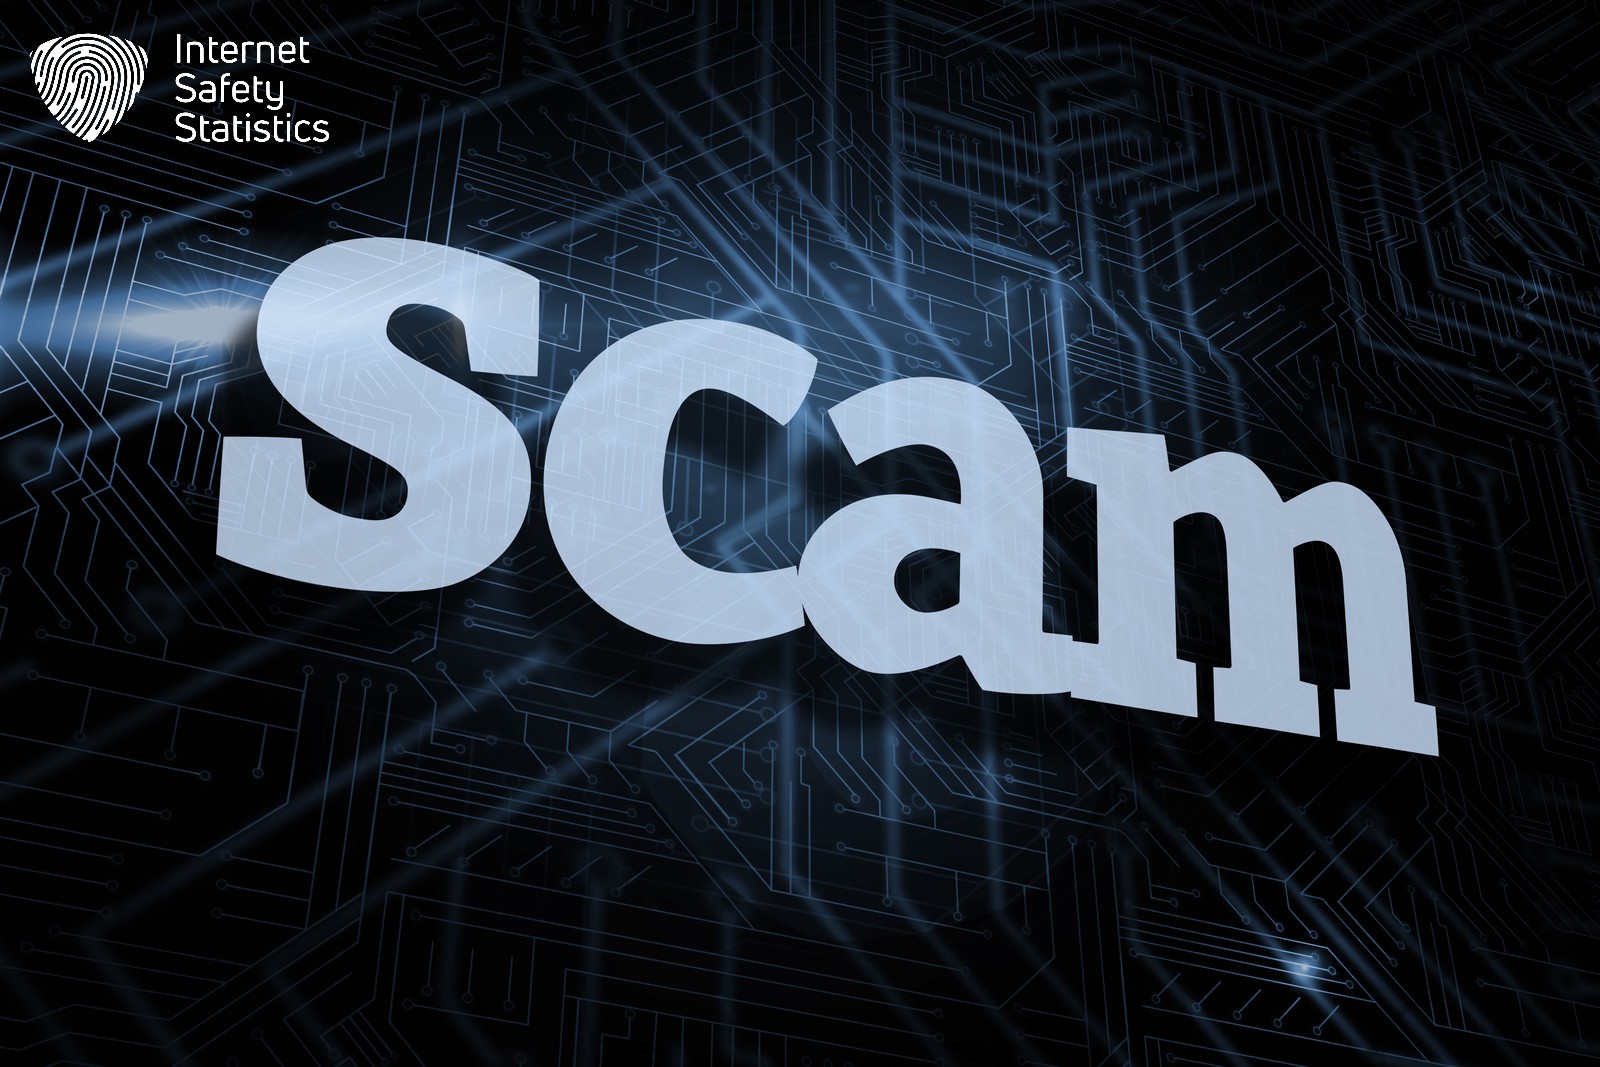 The MalwareTips blogs include guides and even the latest scam reports and warning.